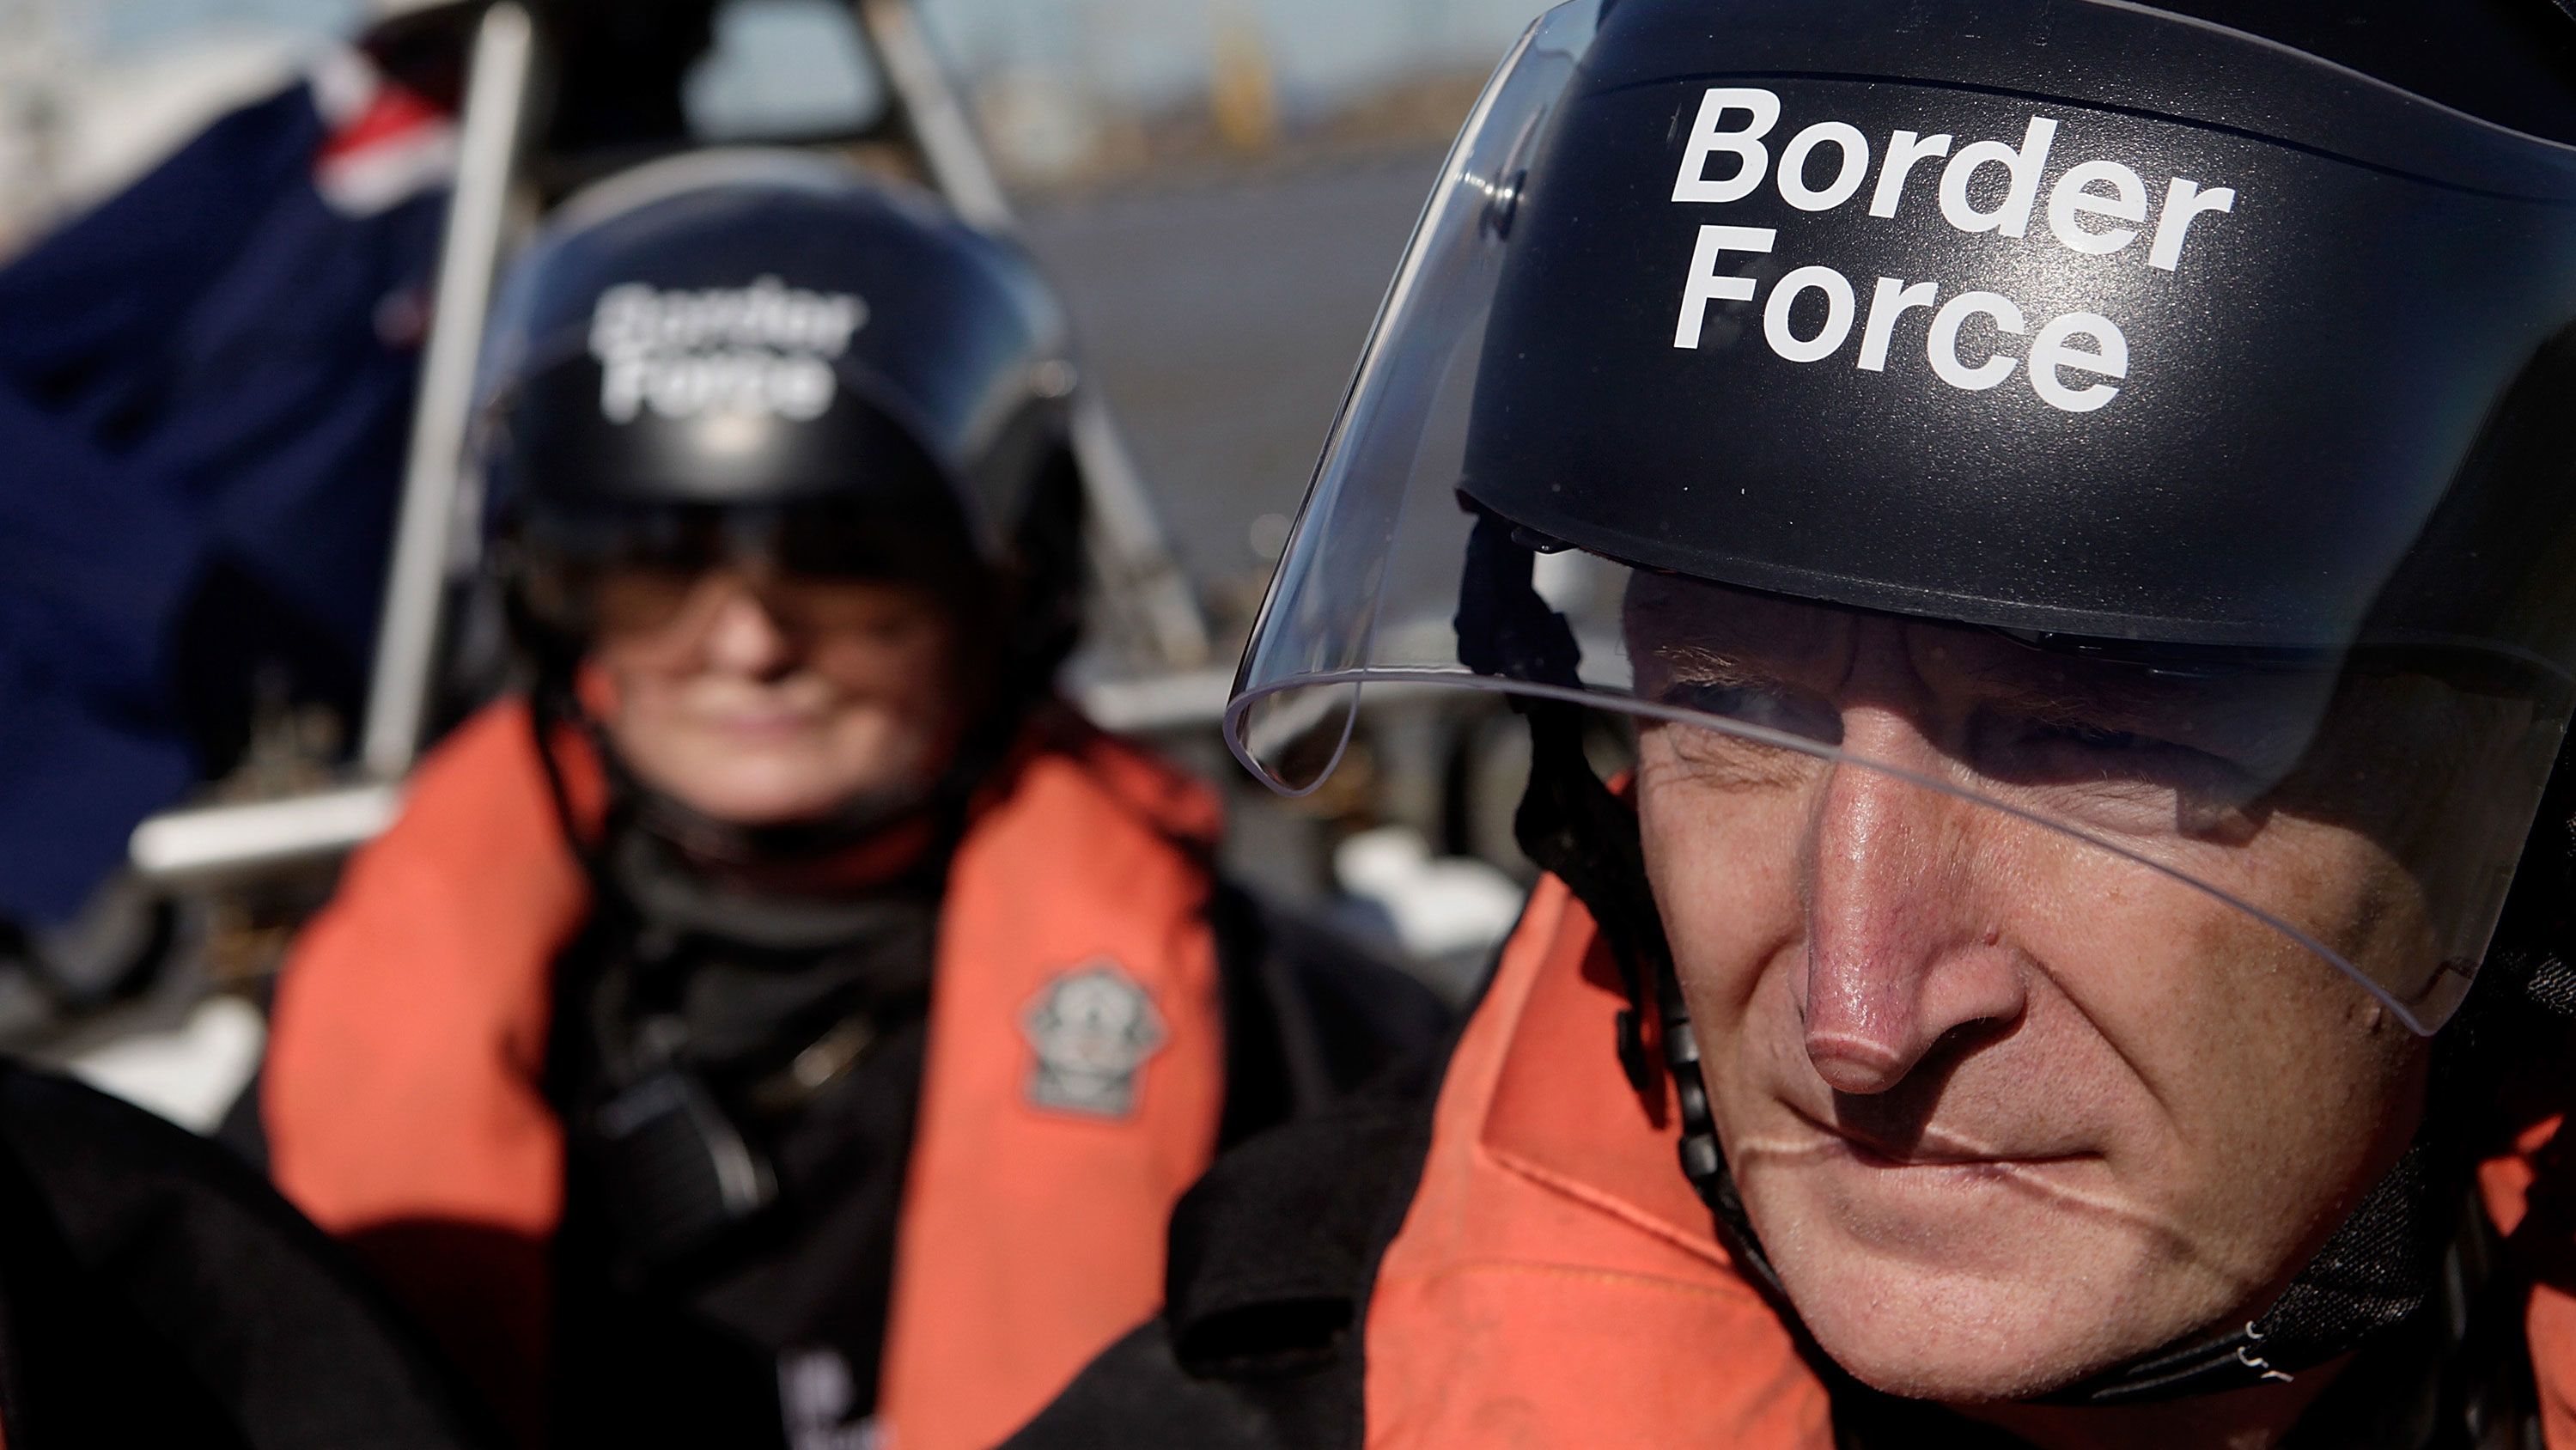 The Border Force has three vessels patrolling the UK coastline, which it says isn't enough.